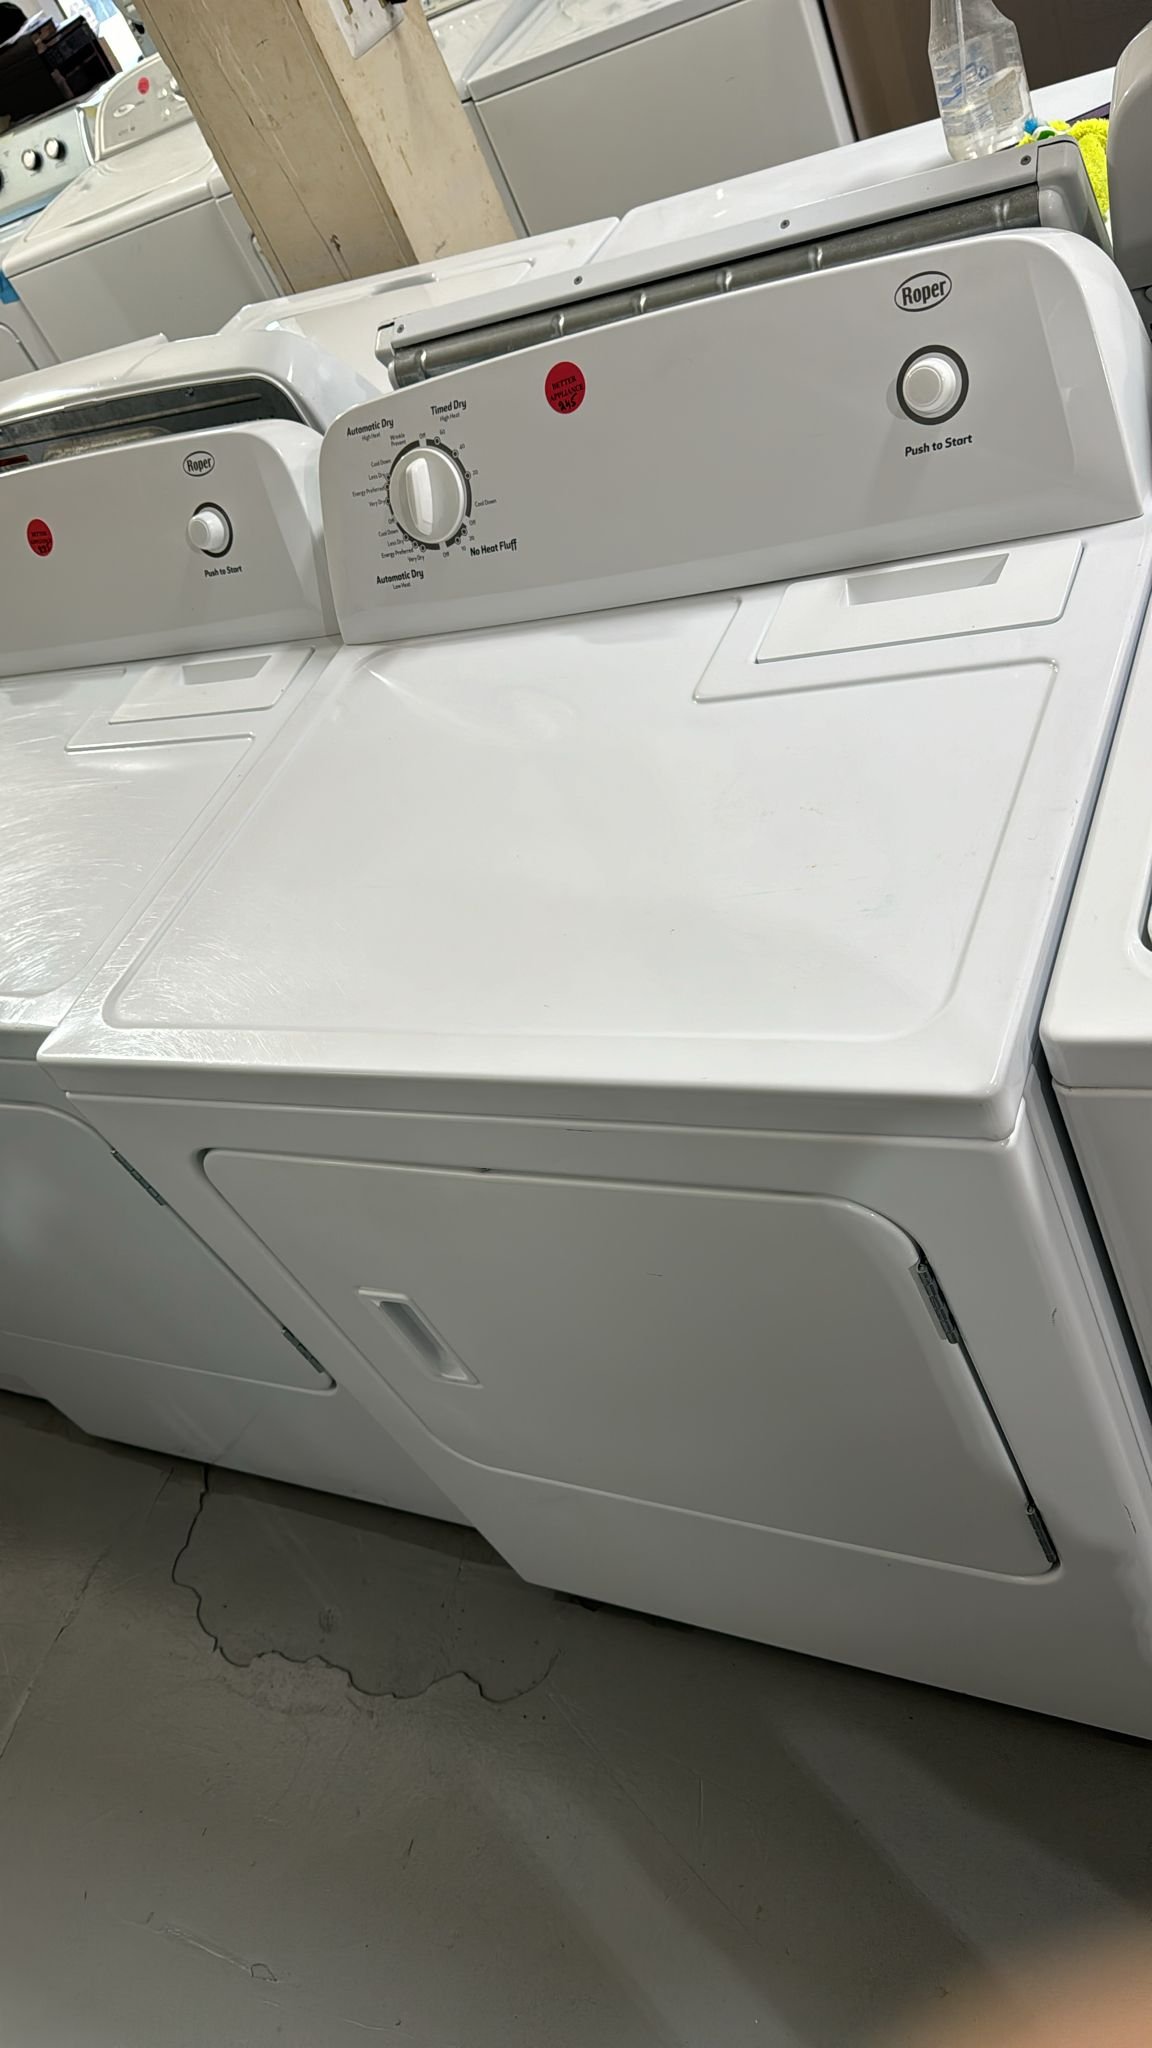 Roper Used Front Load Dryer – White